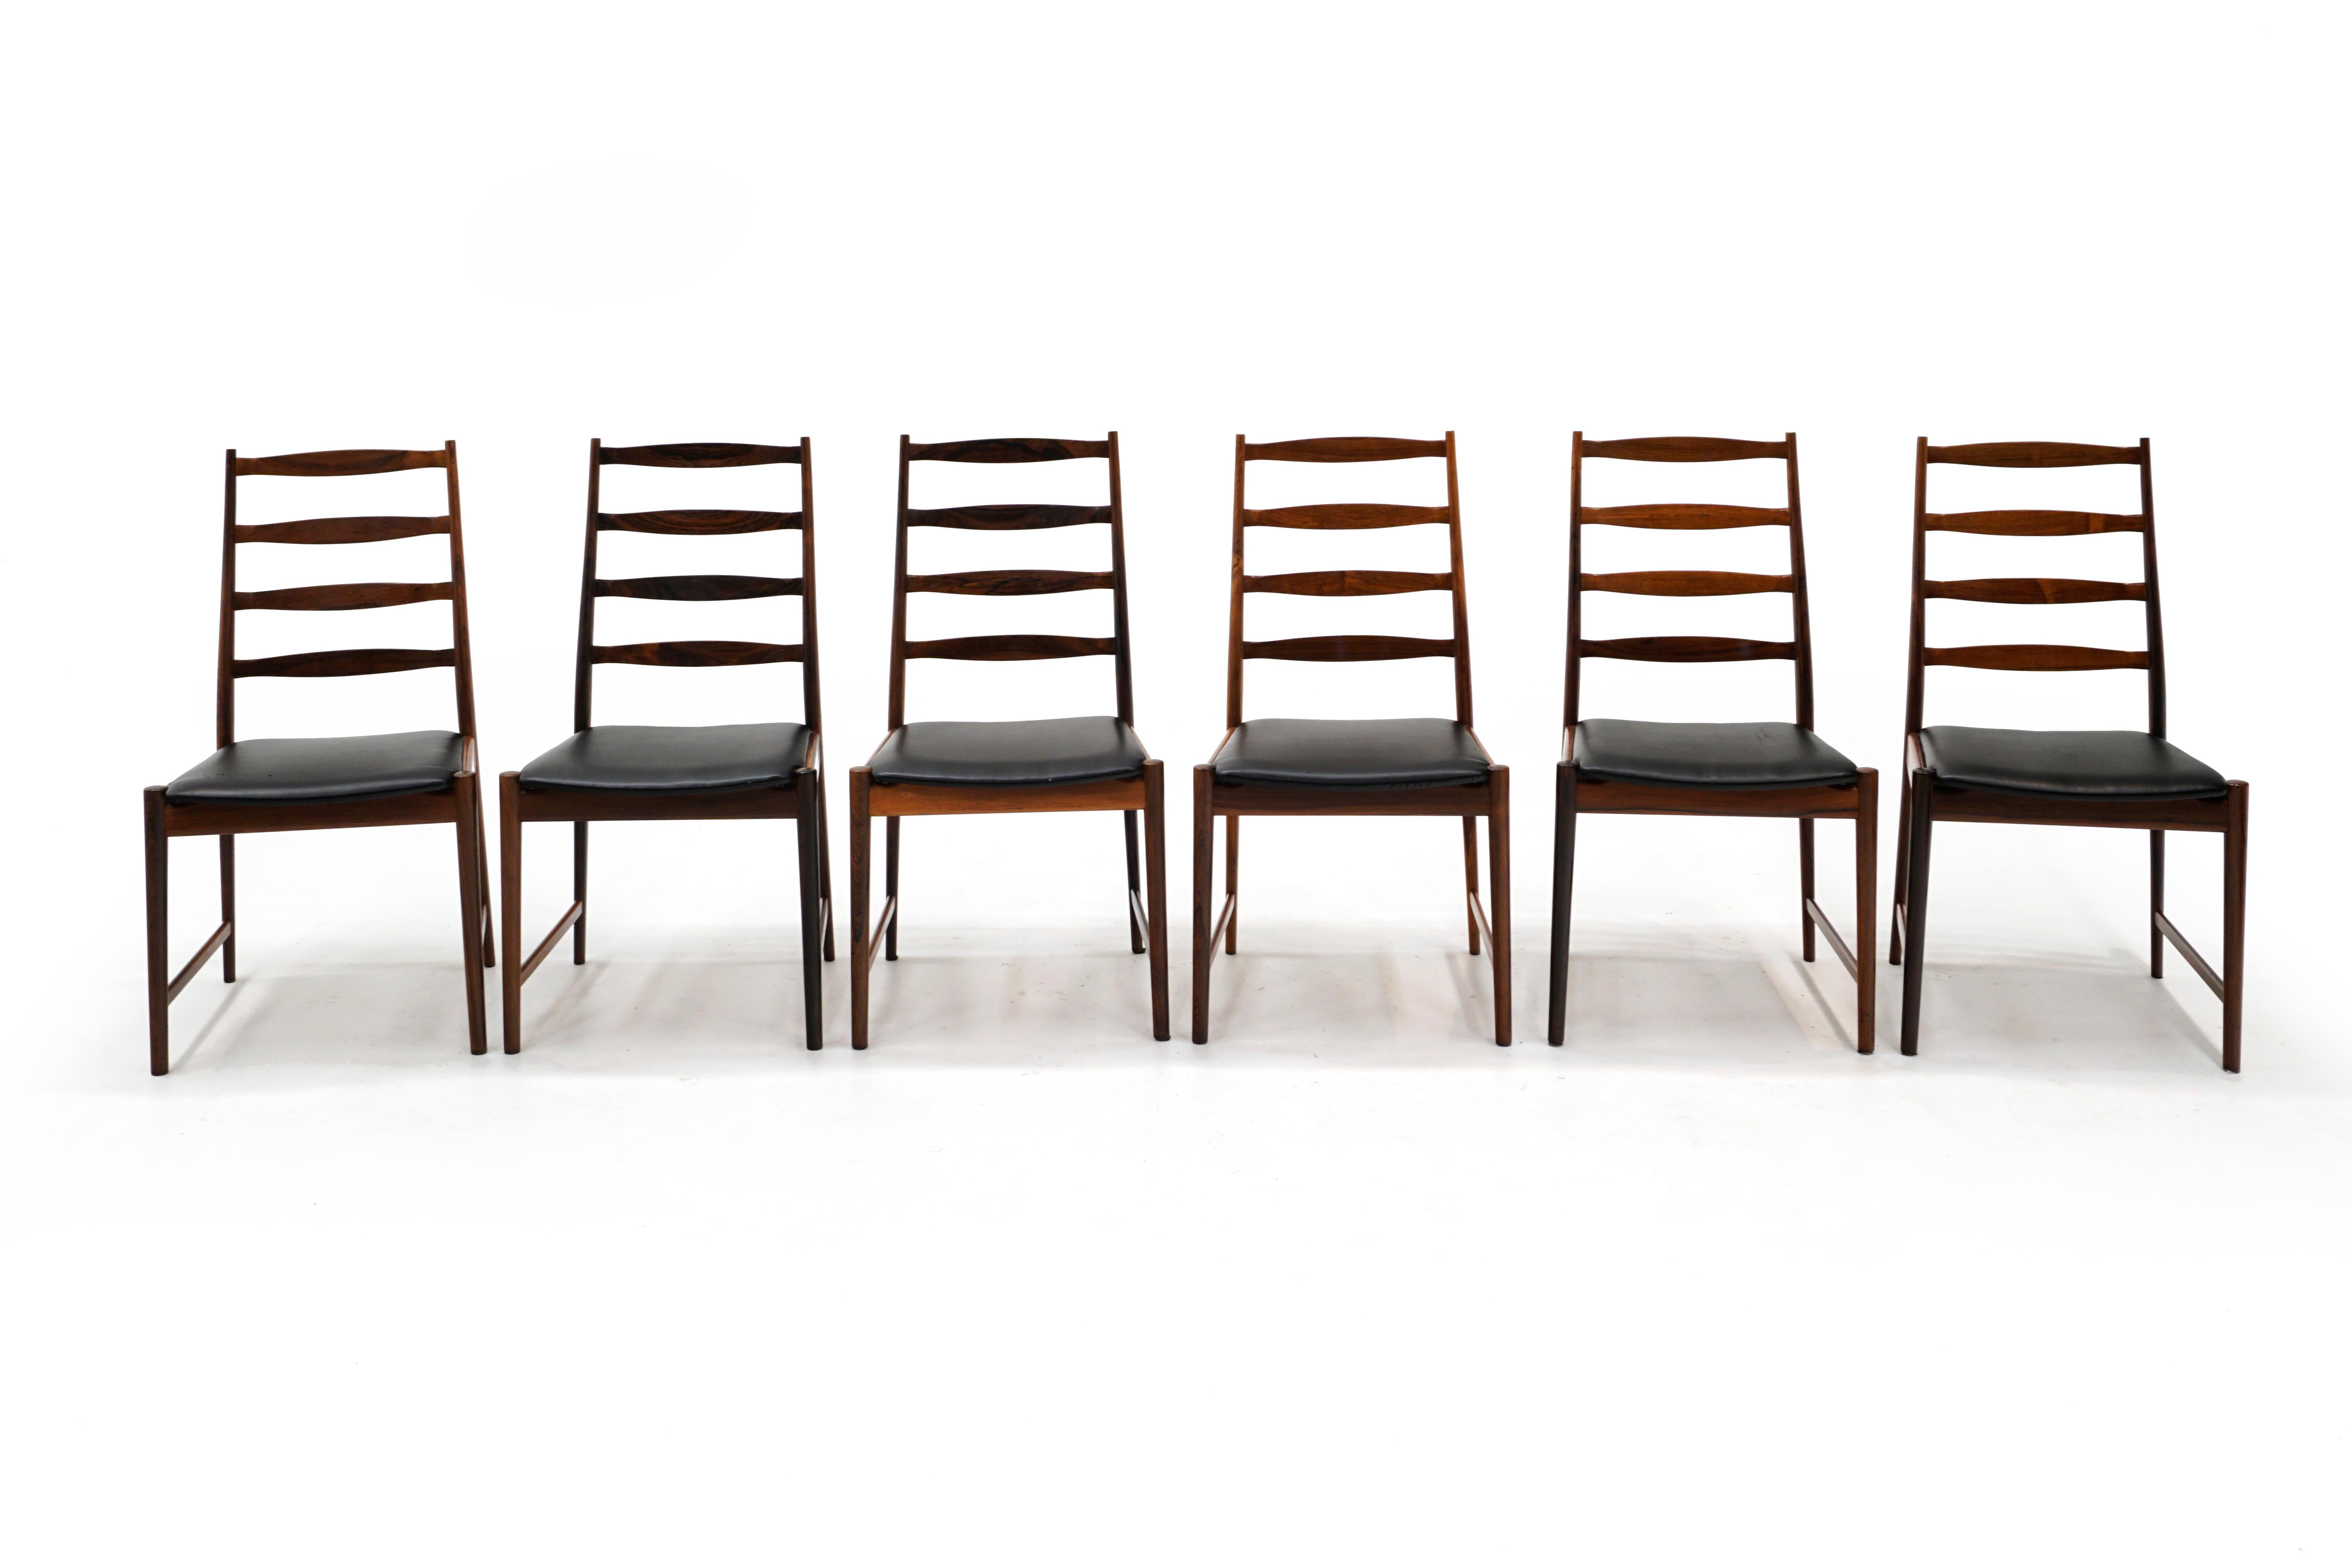 Set of 6 stunning armless rosewood dining chairs designed by Arne Vodder and made by Vamo Sonderborg, Denmark, 1960s. Signed with branded mark on underside of chairs. Beautiful set.